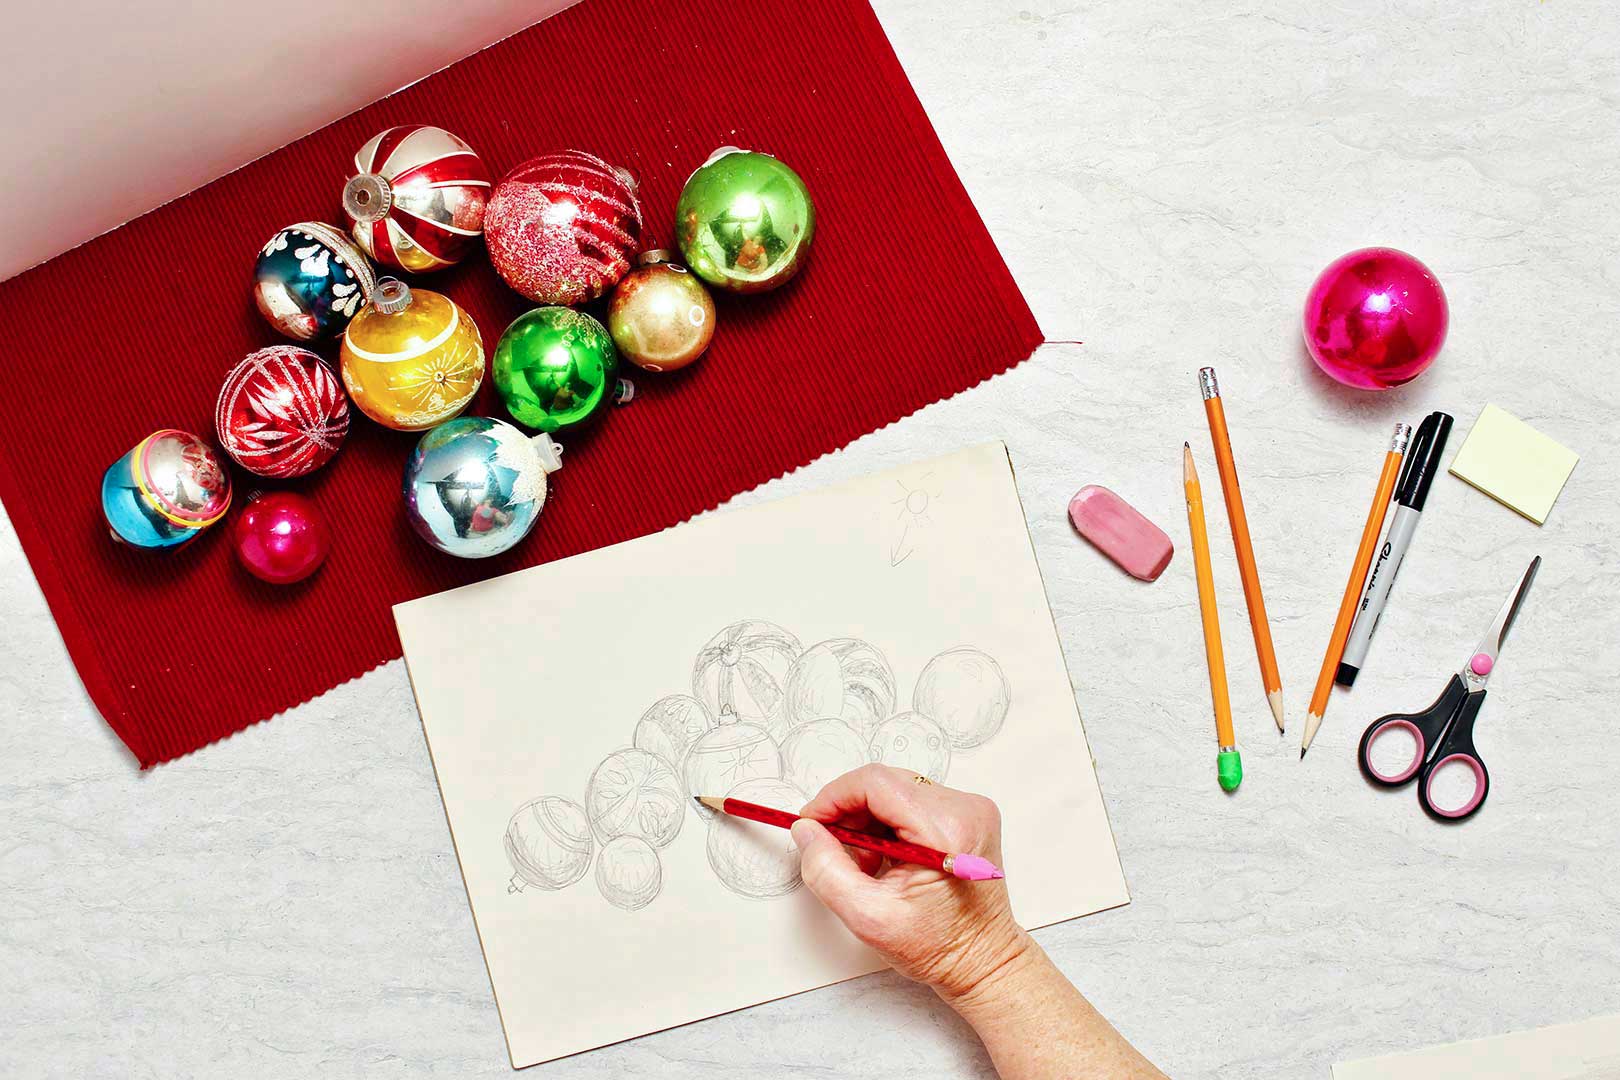 Christmas ornaments lay on a red placemat and a person puts finishing touches on their Christmas ornament pencil drawing.